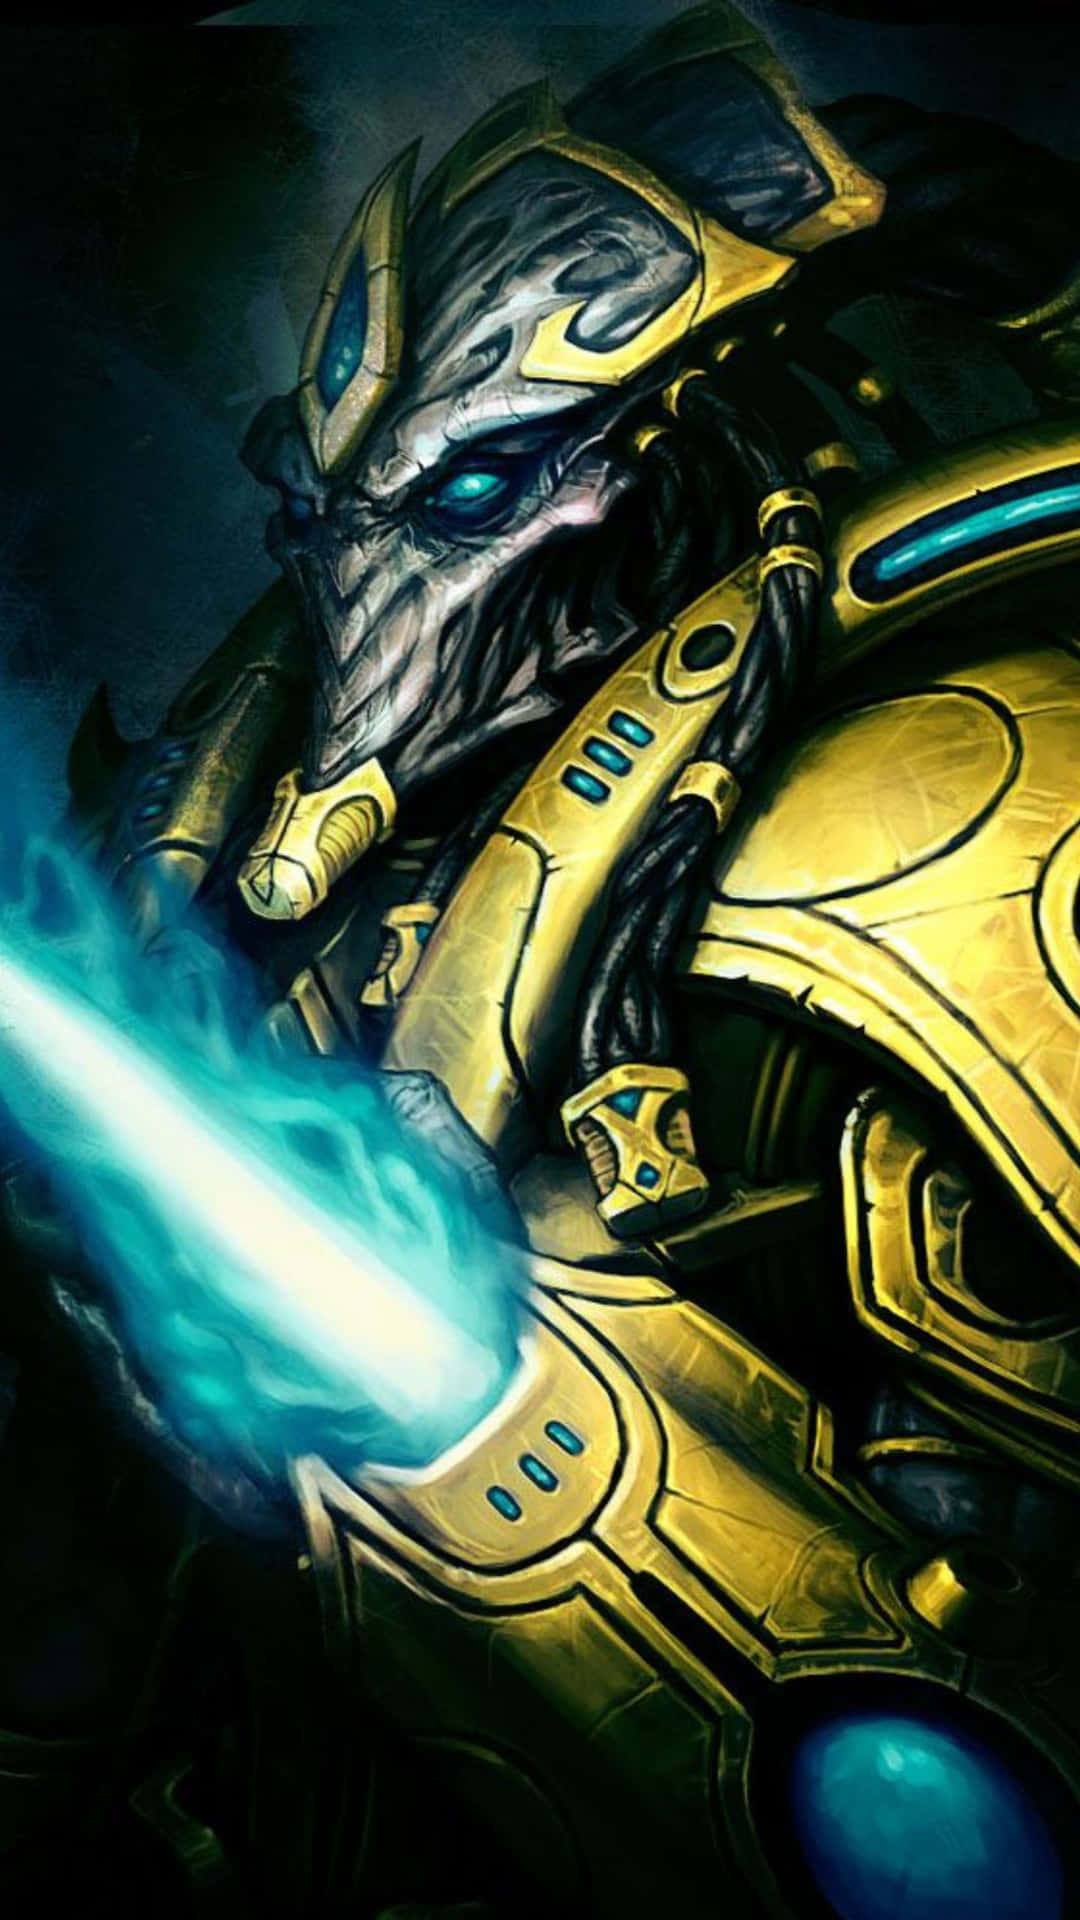 Immerse yourself in the action with Android Starcraft II